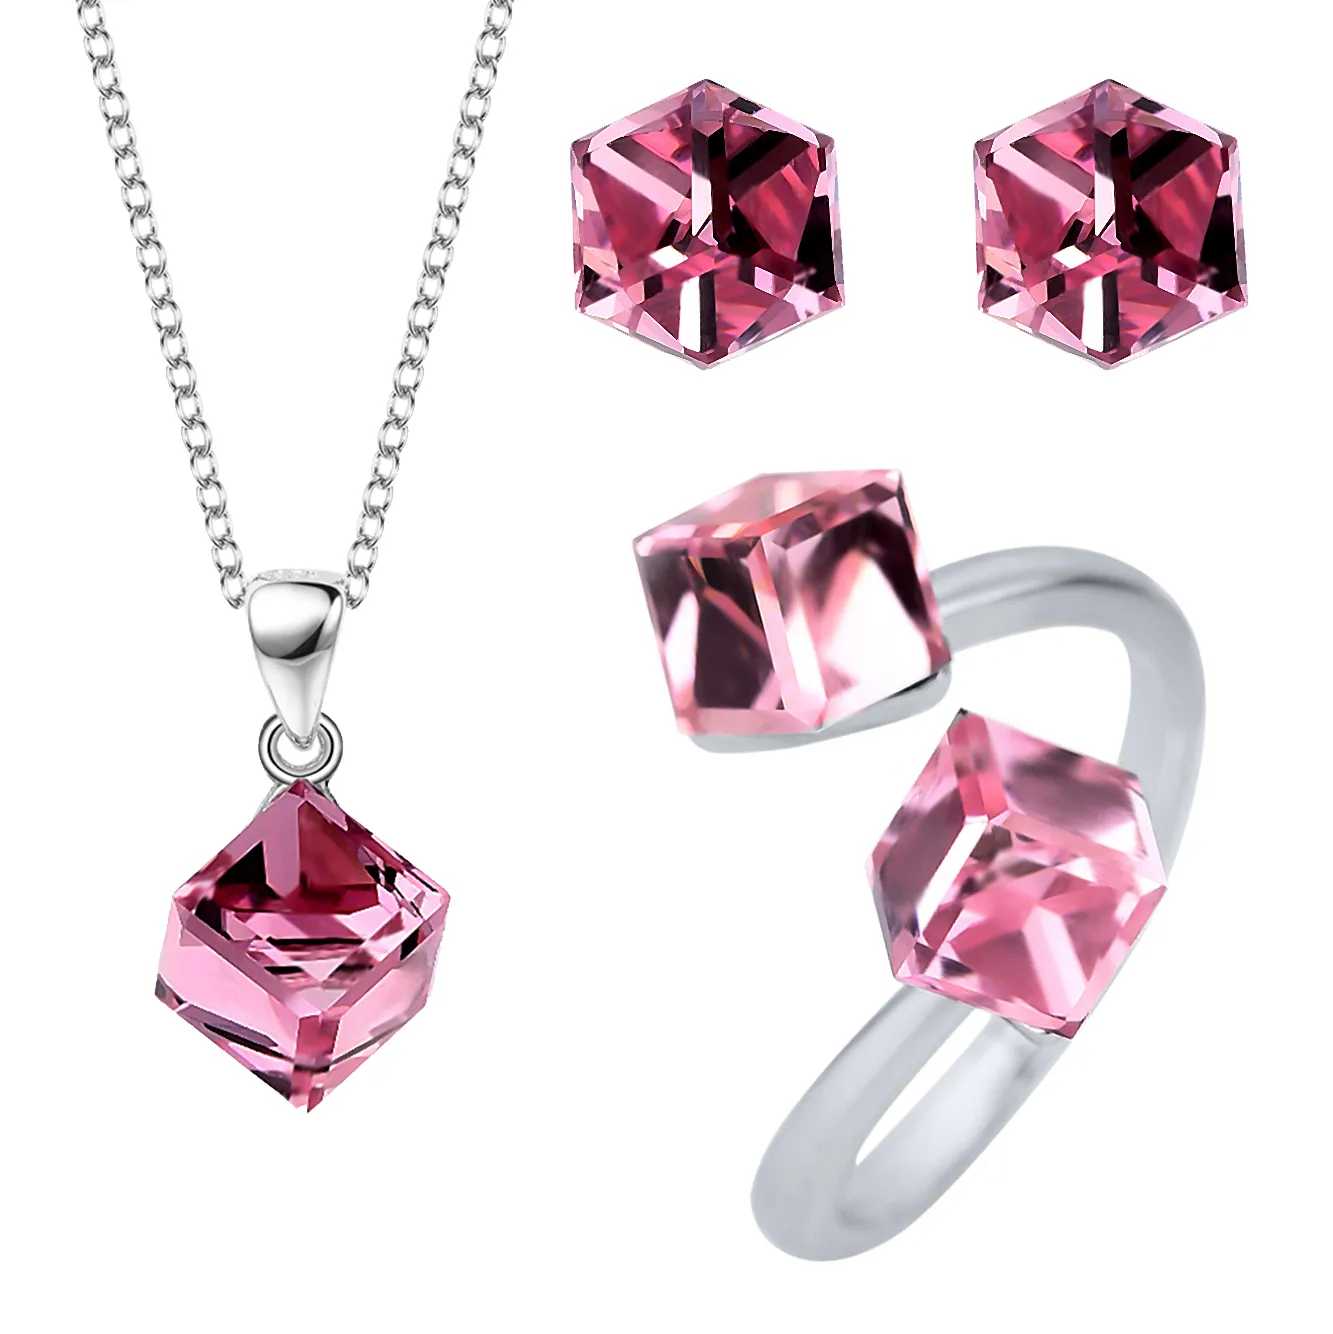 Austrian Crystals Cube Pendant Necklace Stud Earring Ring Set 140300004